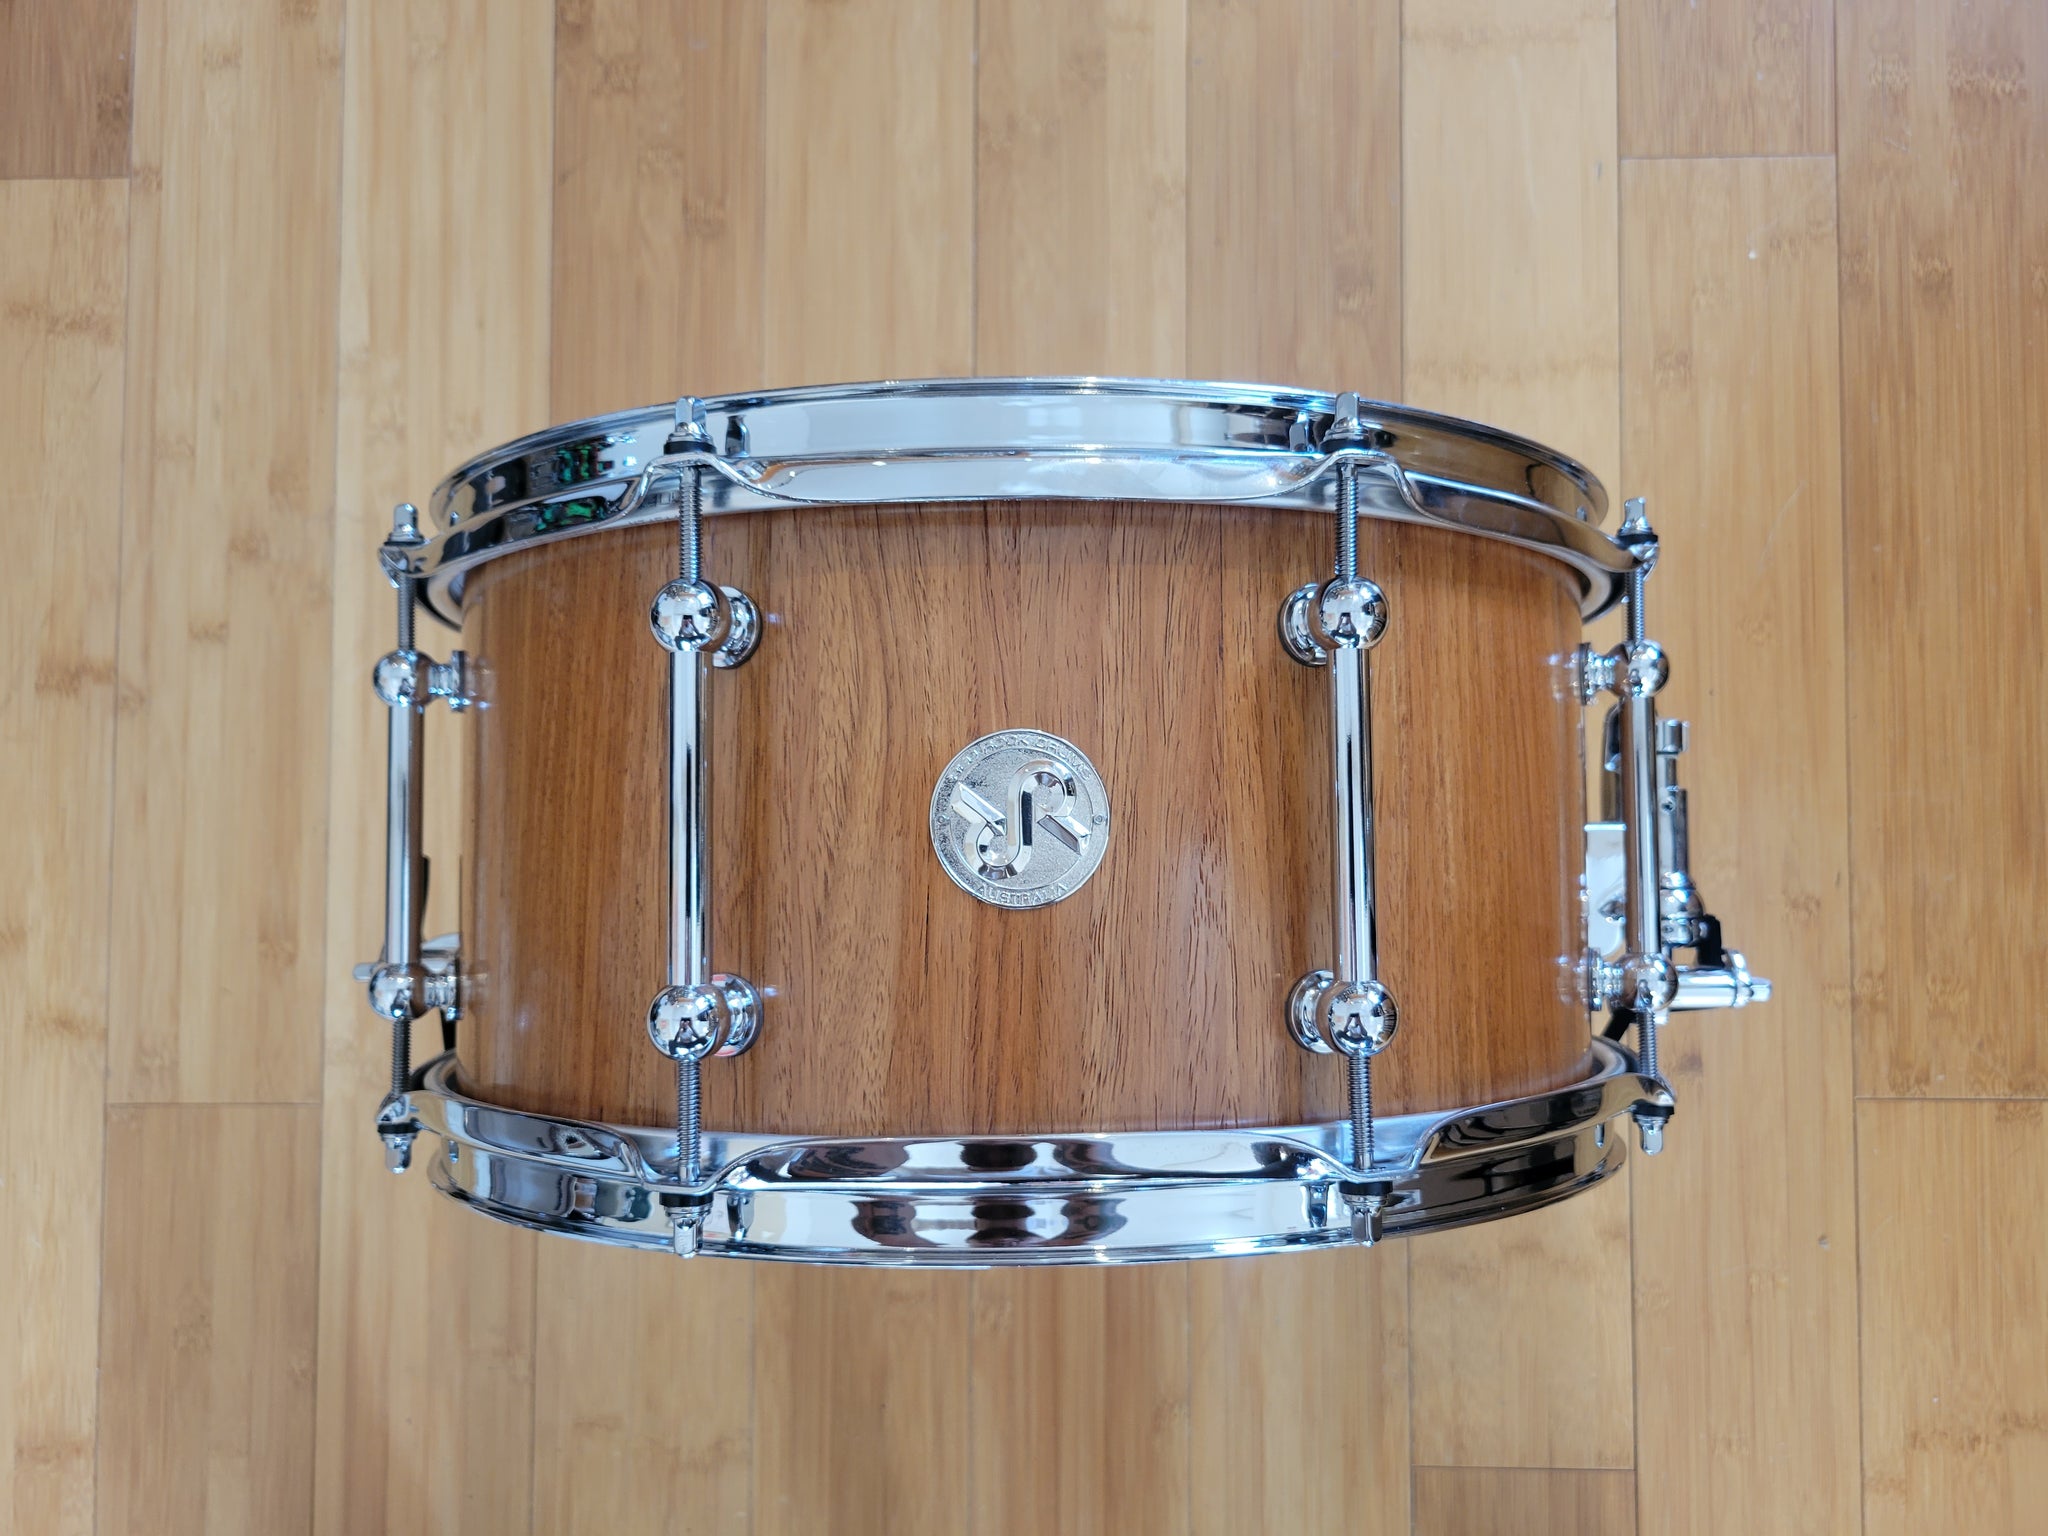 Snares - Red Rock Drums 7x14 "National" Series New Guinea Rosewood Snare Drum